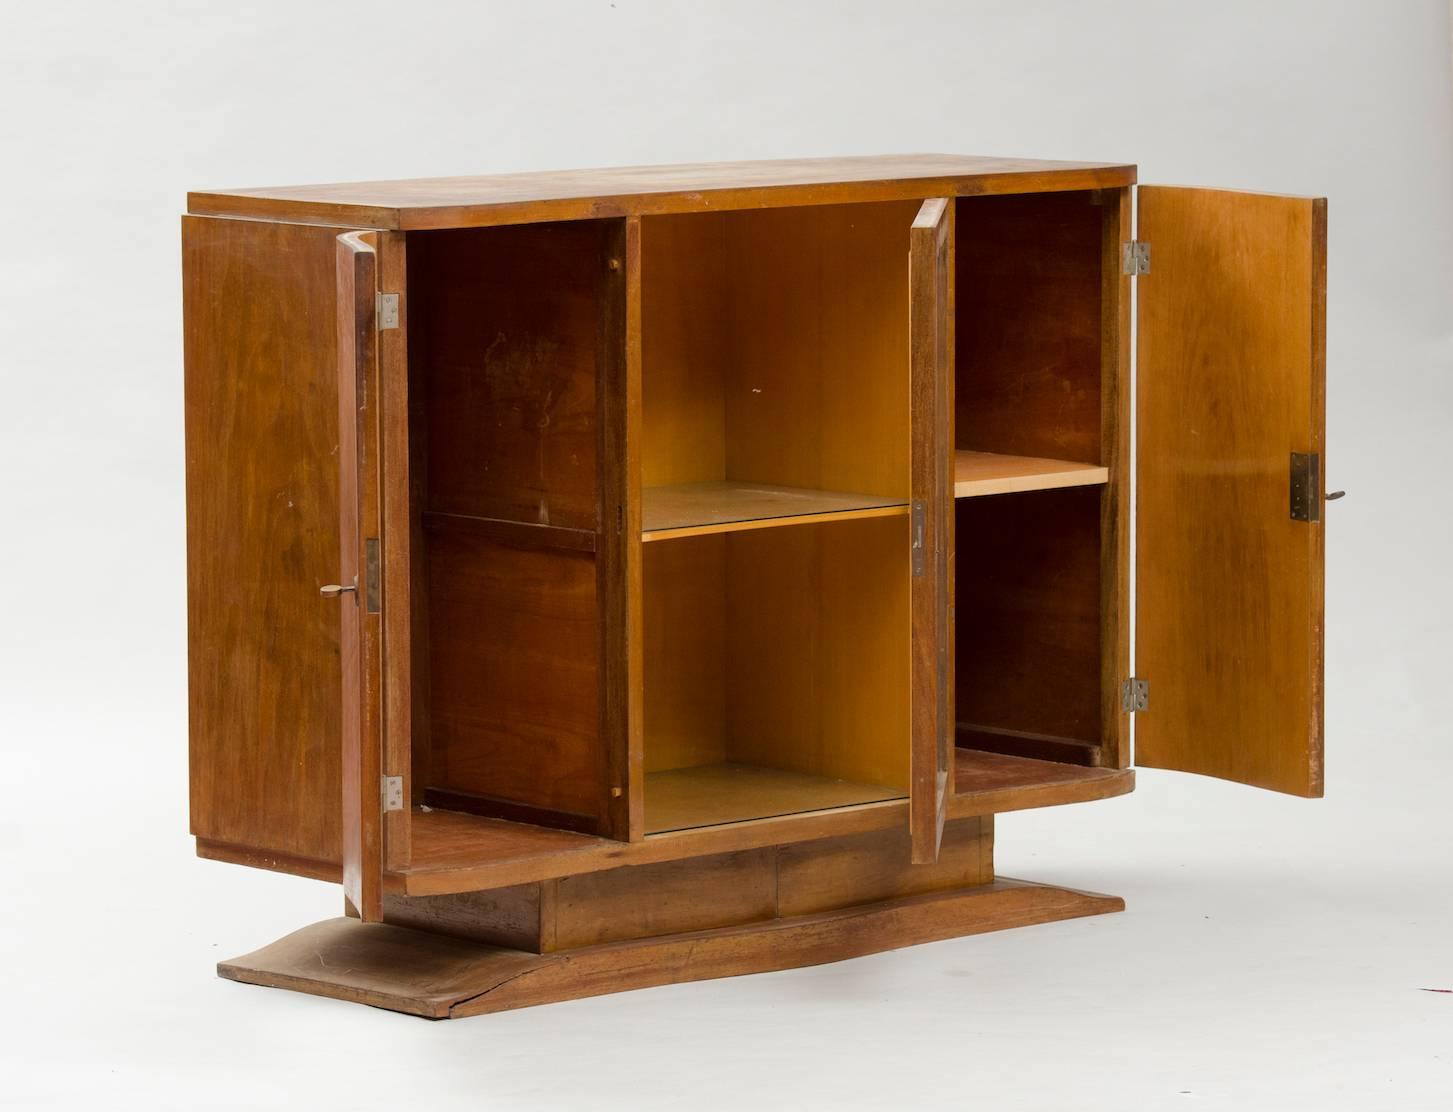 Small Art Deco walnut sideboard with central display area.
Price fully restored: 2775€
The price shown is in the original condition.
We have our own workshop and we can restore these items, including upholstery and all the piece might need.